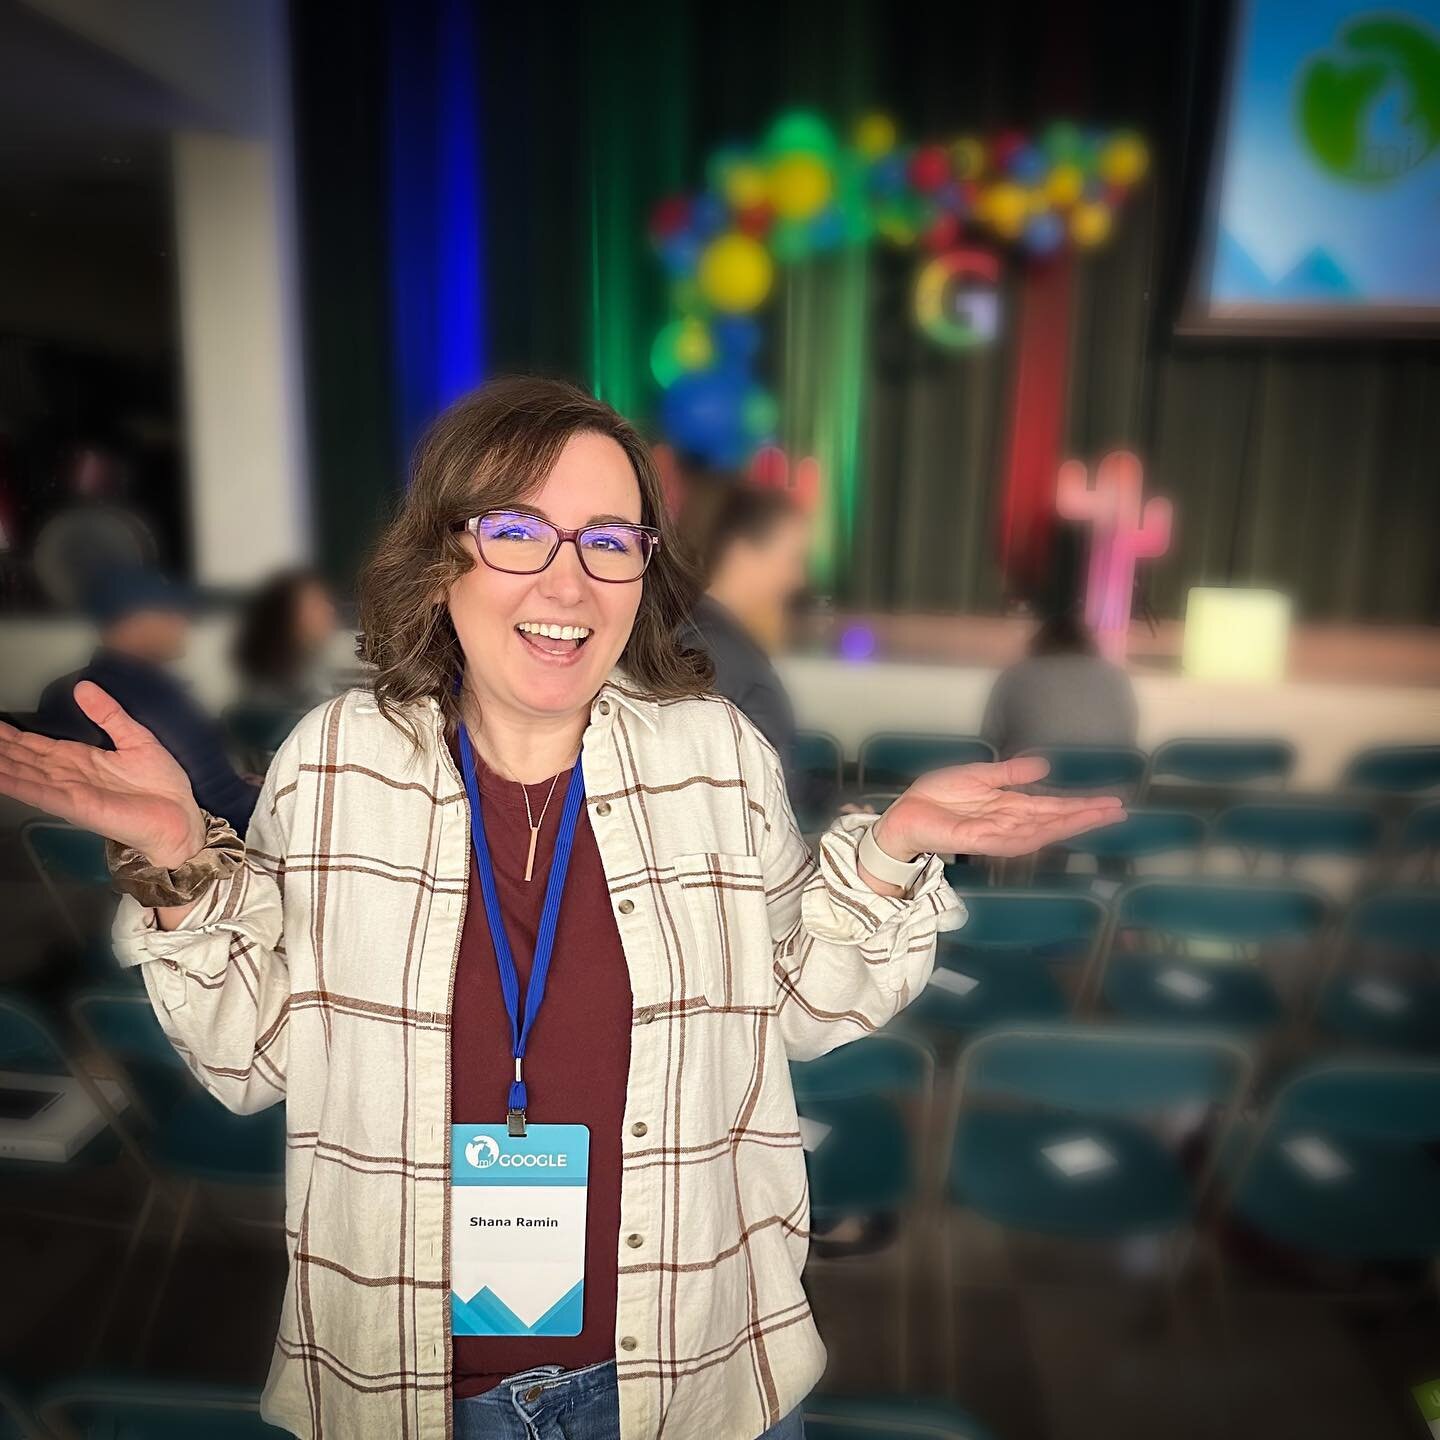 Looking forward to a fun day of learning at #migoogle! Please like this photo so I can win a prize. 🤣🤣 (I&rsquo;m very competitive in niche situations and conference prizes are one of those situations, lol).